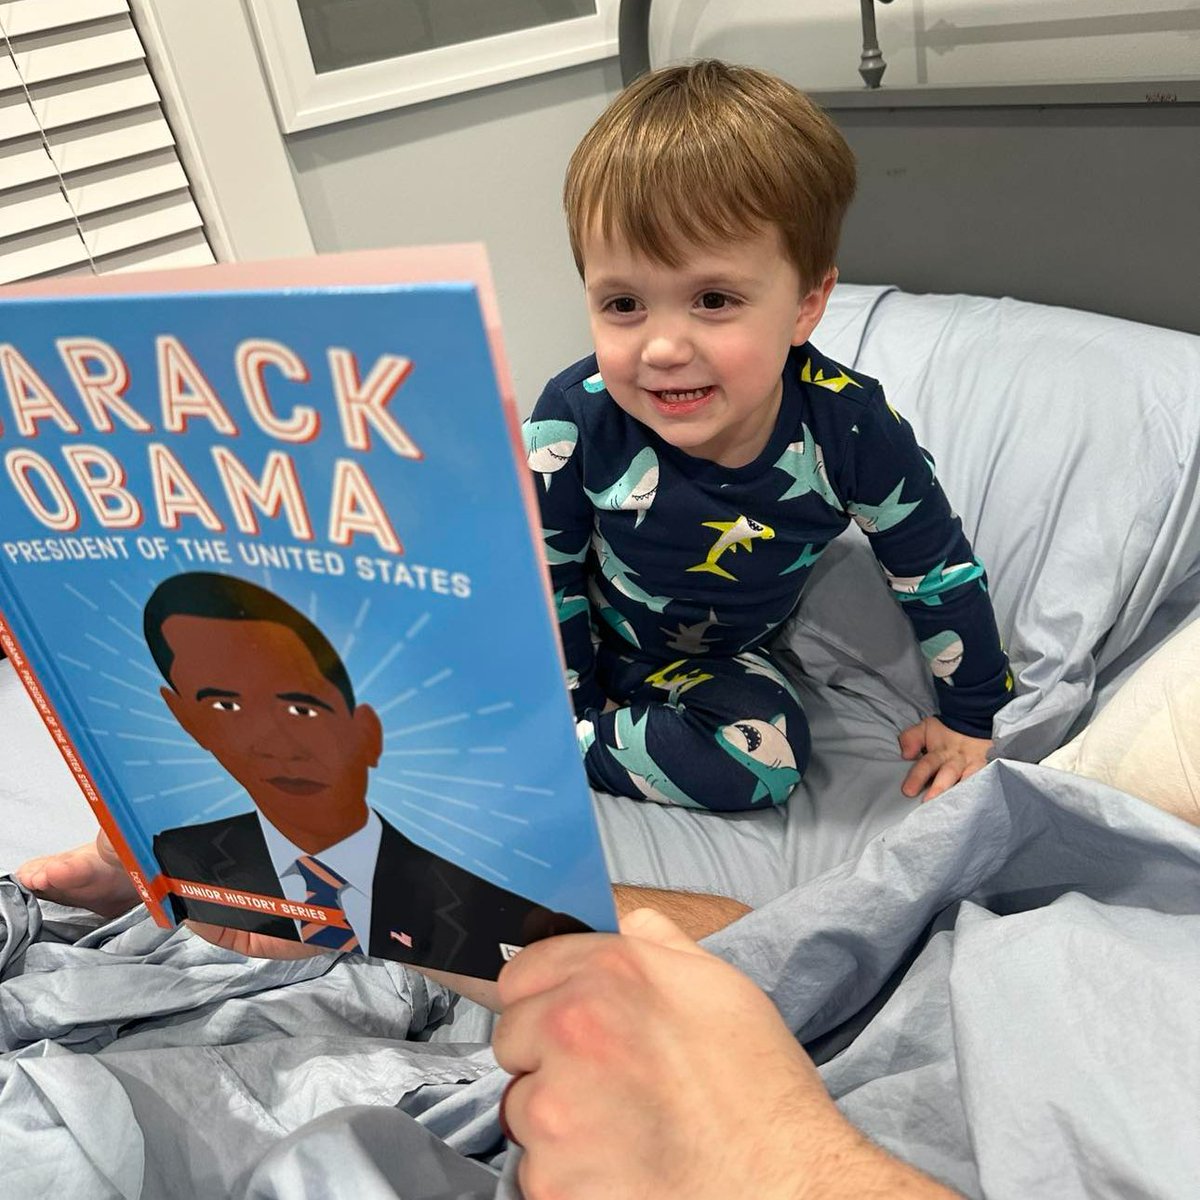 Last night, Tate and I started a new nightly book.

When we got to Barack Obama's first Presidential Portrait, Tate said, 'It's Captain America!!'.

You know what? He's right. #YesWeStillCan